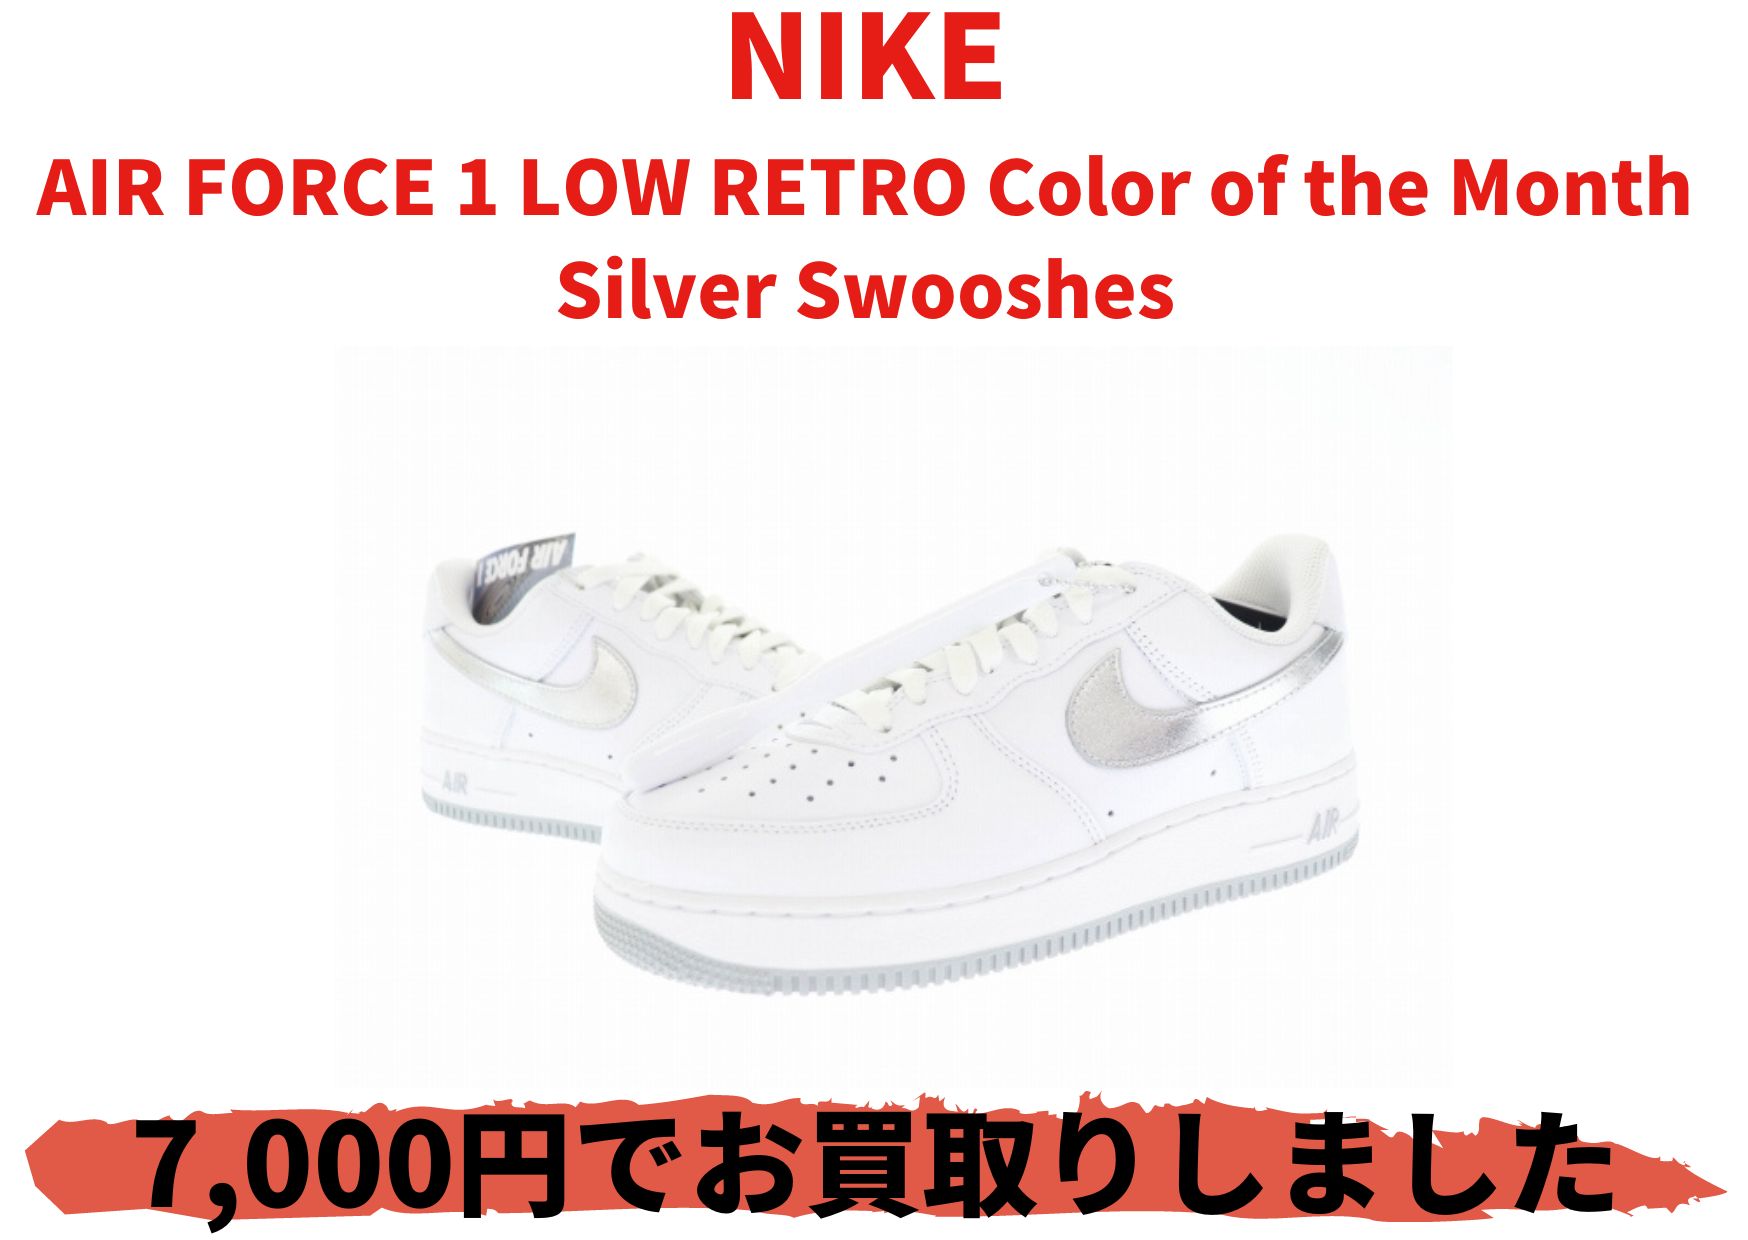 NIKE AIR FORCE 1 LOW RETRO Color of the Month Silver Swooshes